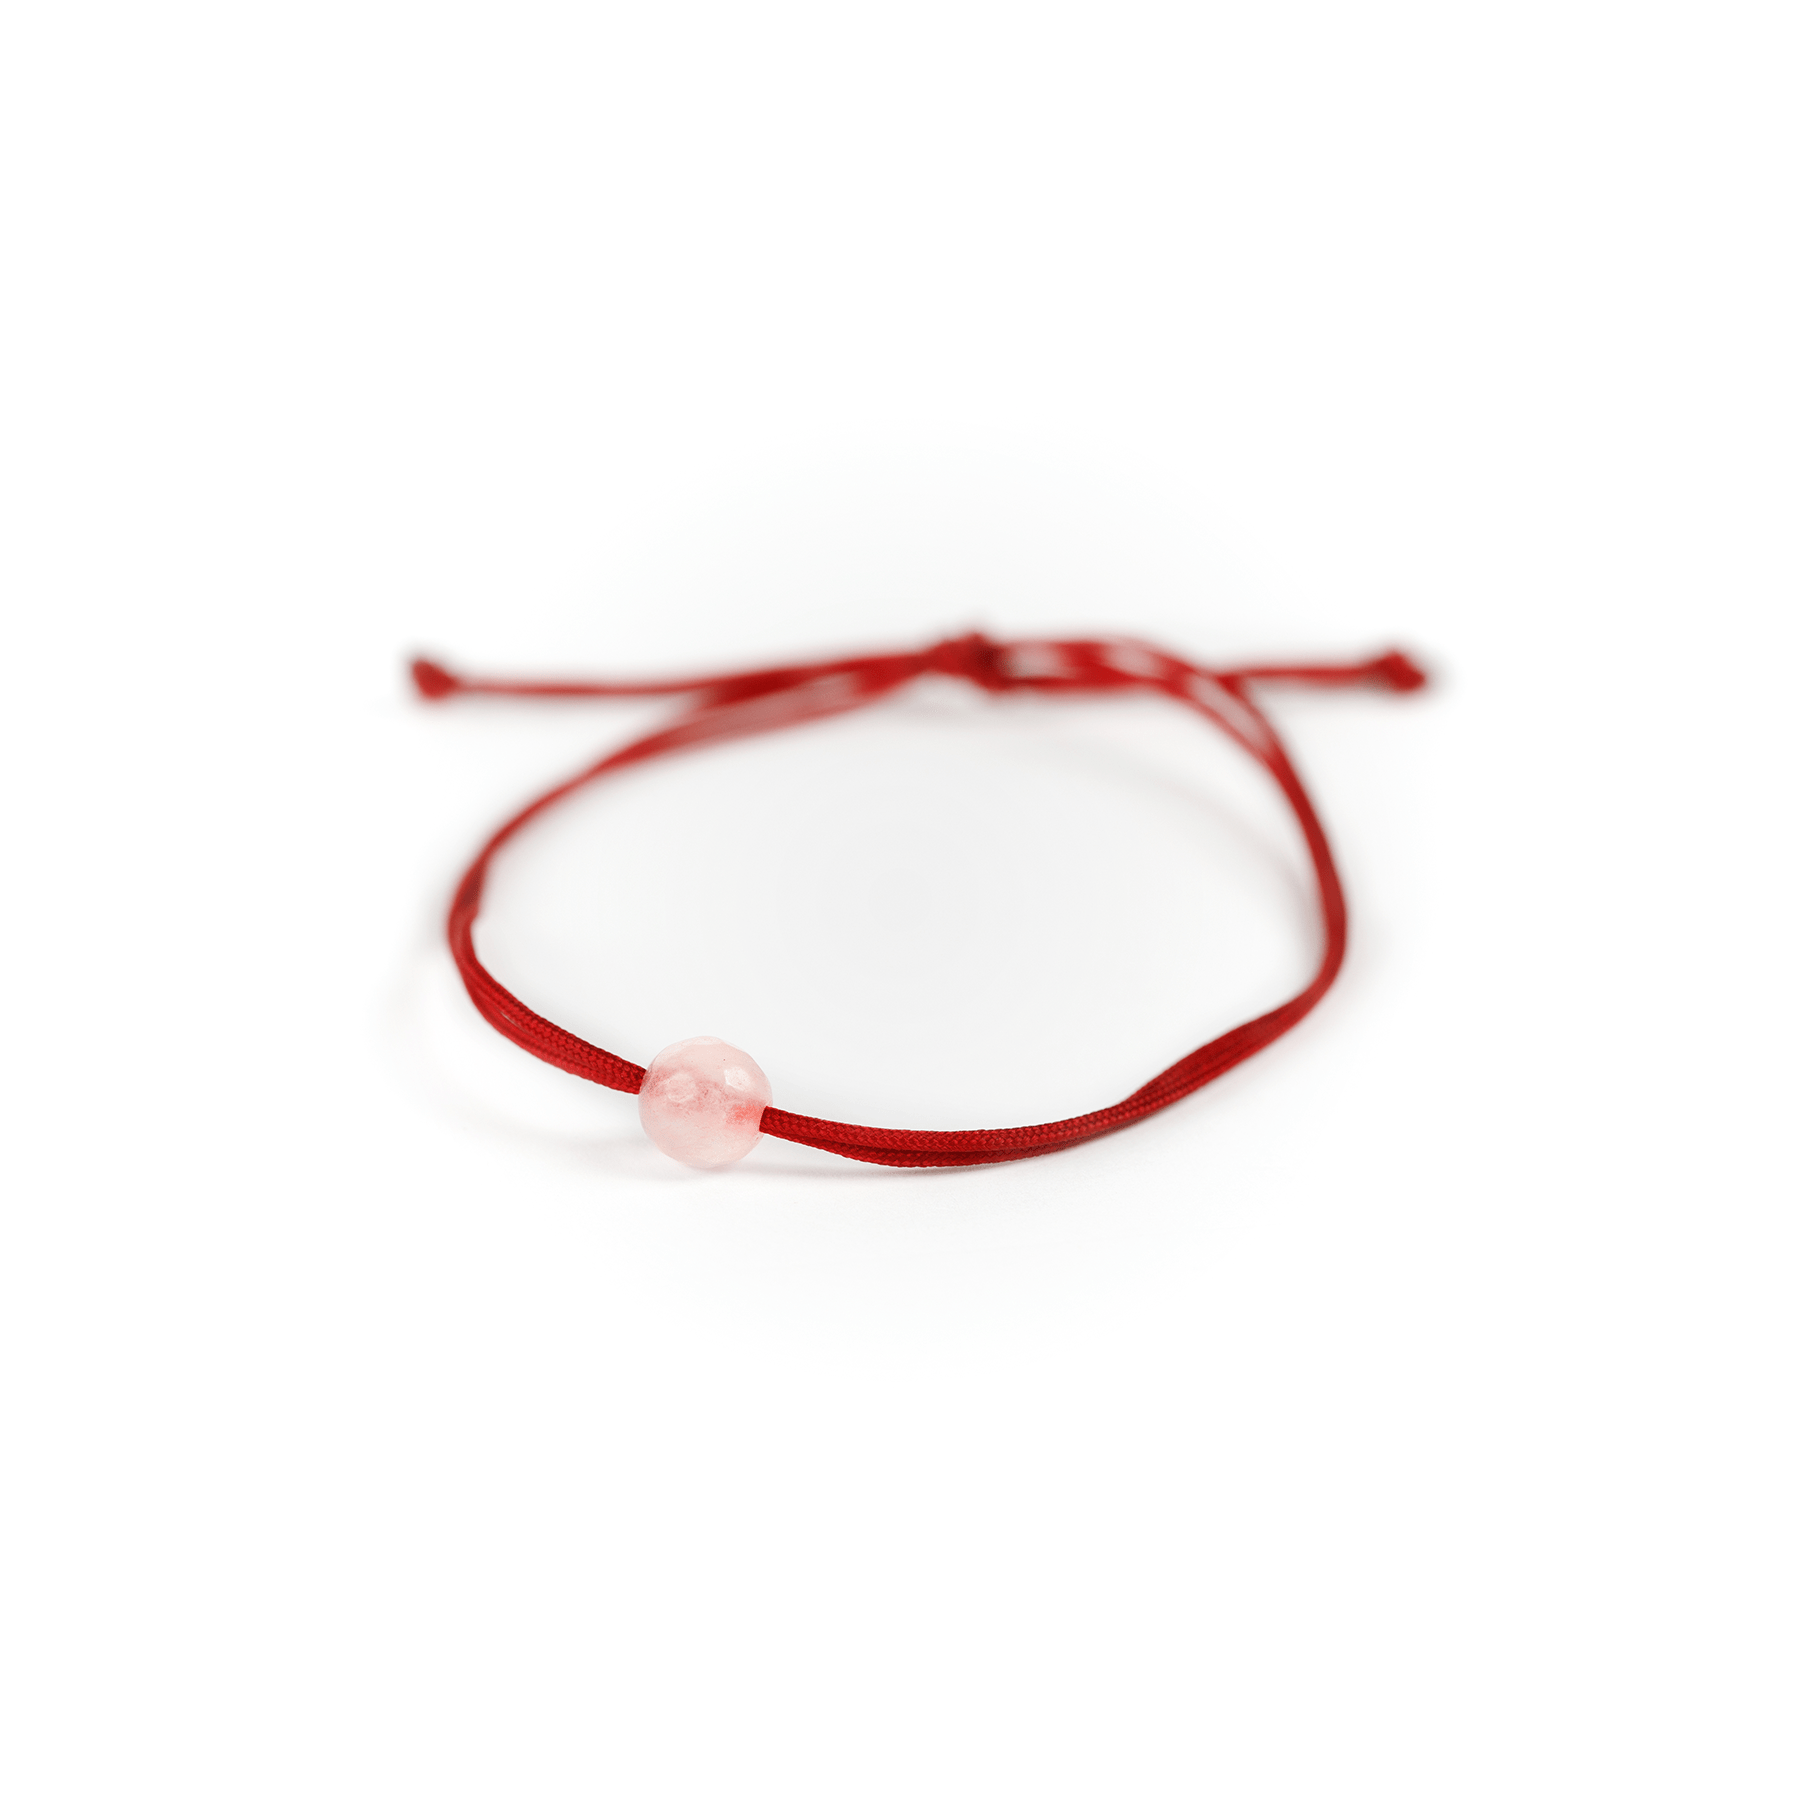 Blueberry Good vibes red thread bracelet – Blueberry Accessories